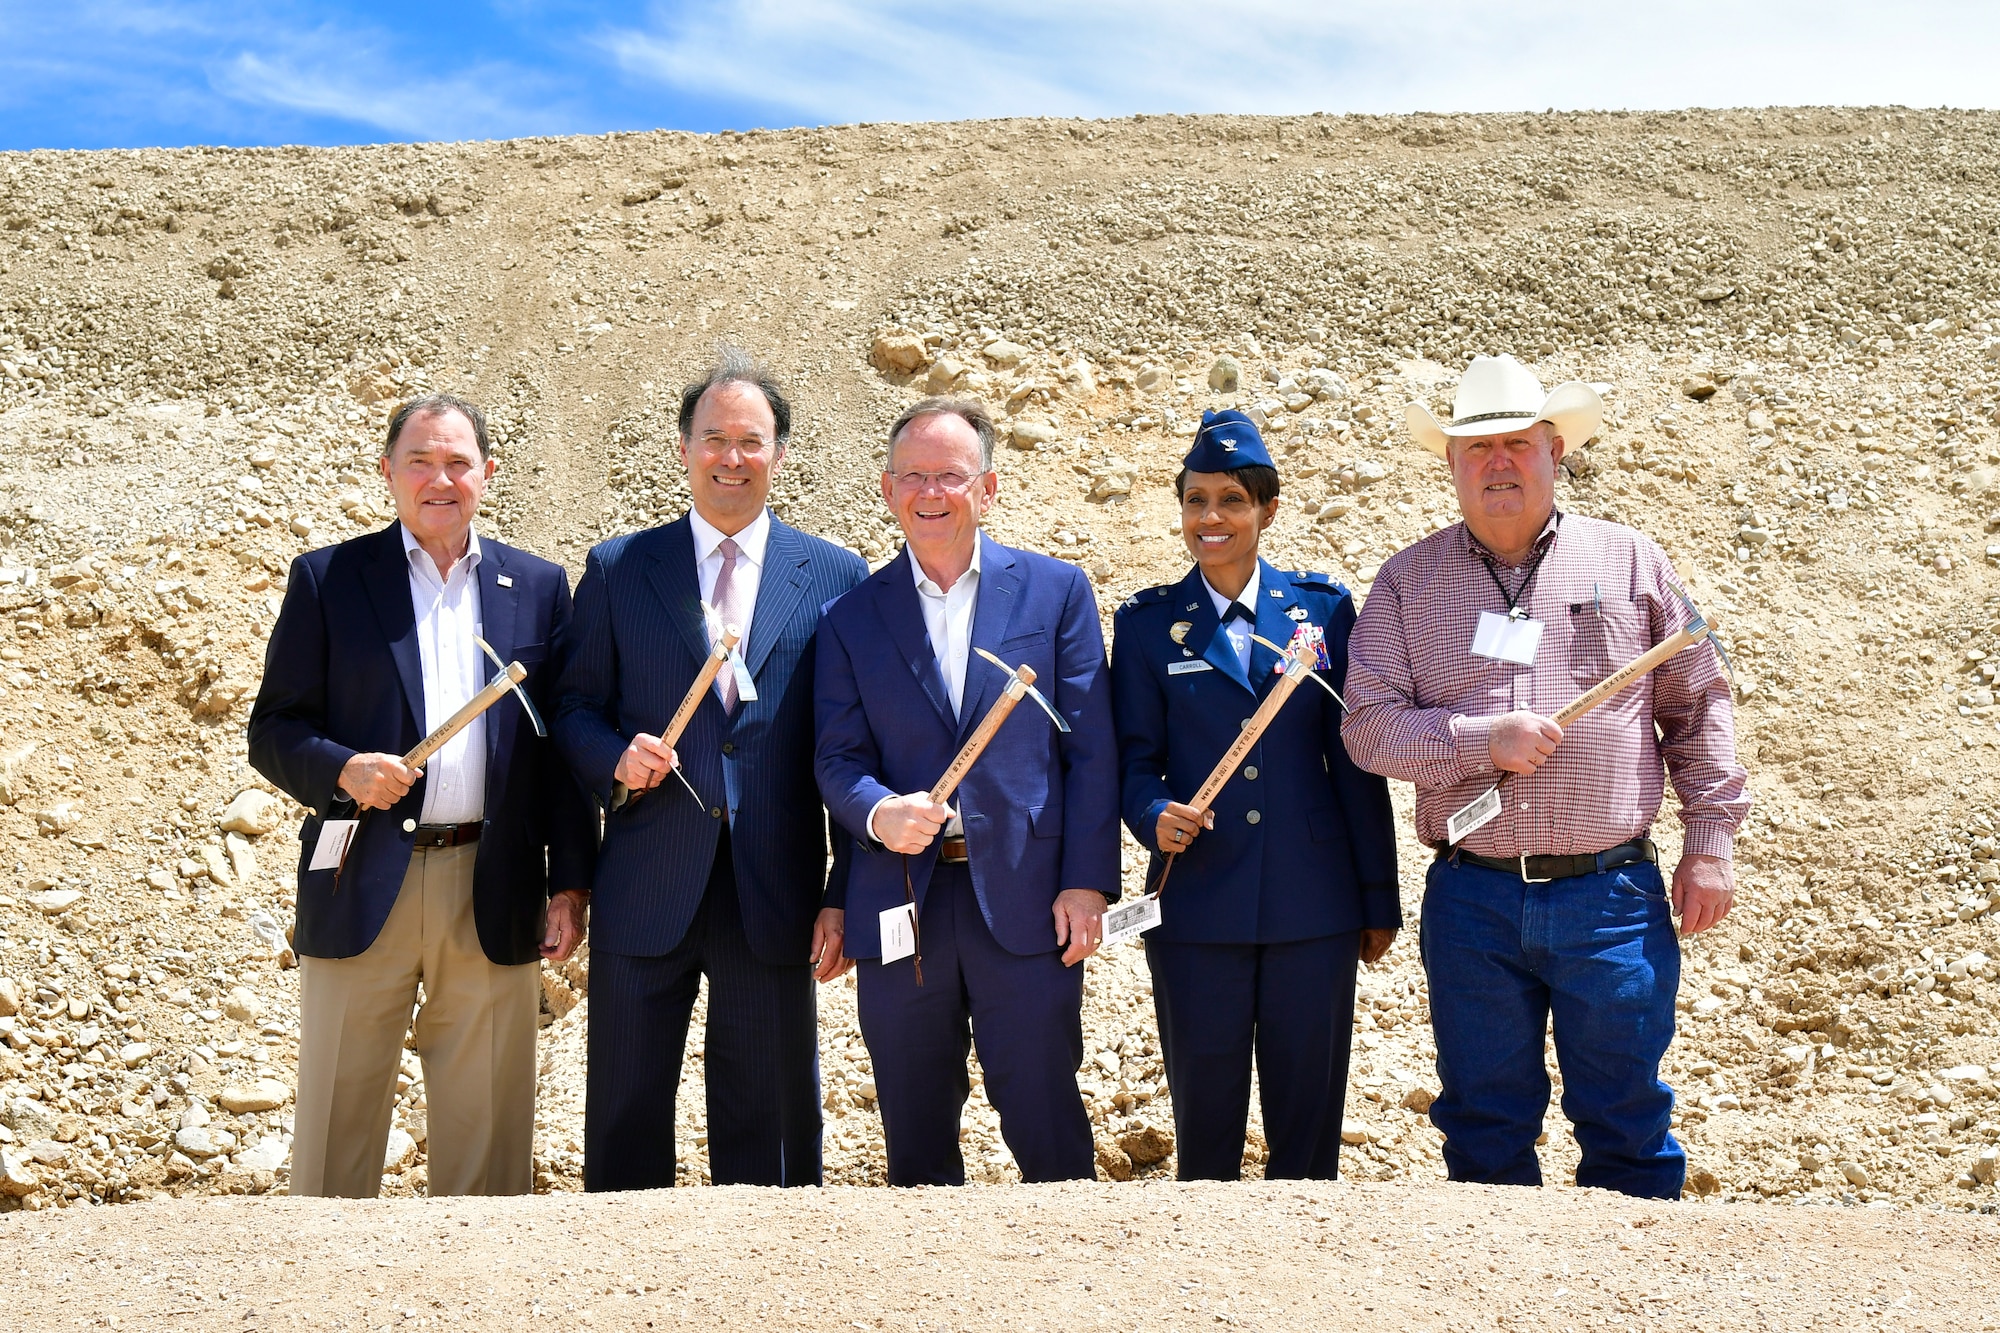 A group photo of ground breaking participants holding up a ceremonial pick axe.